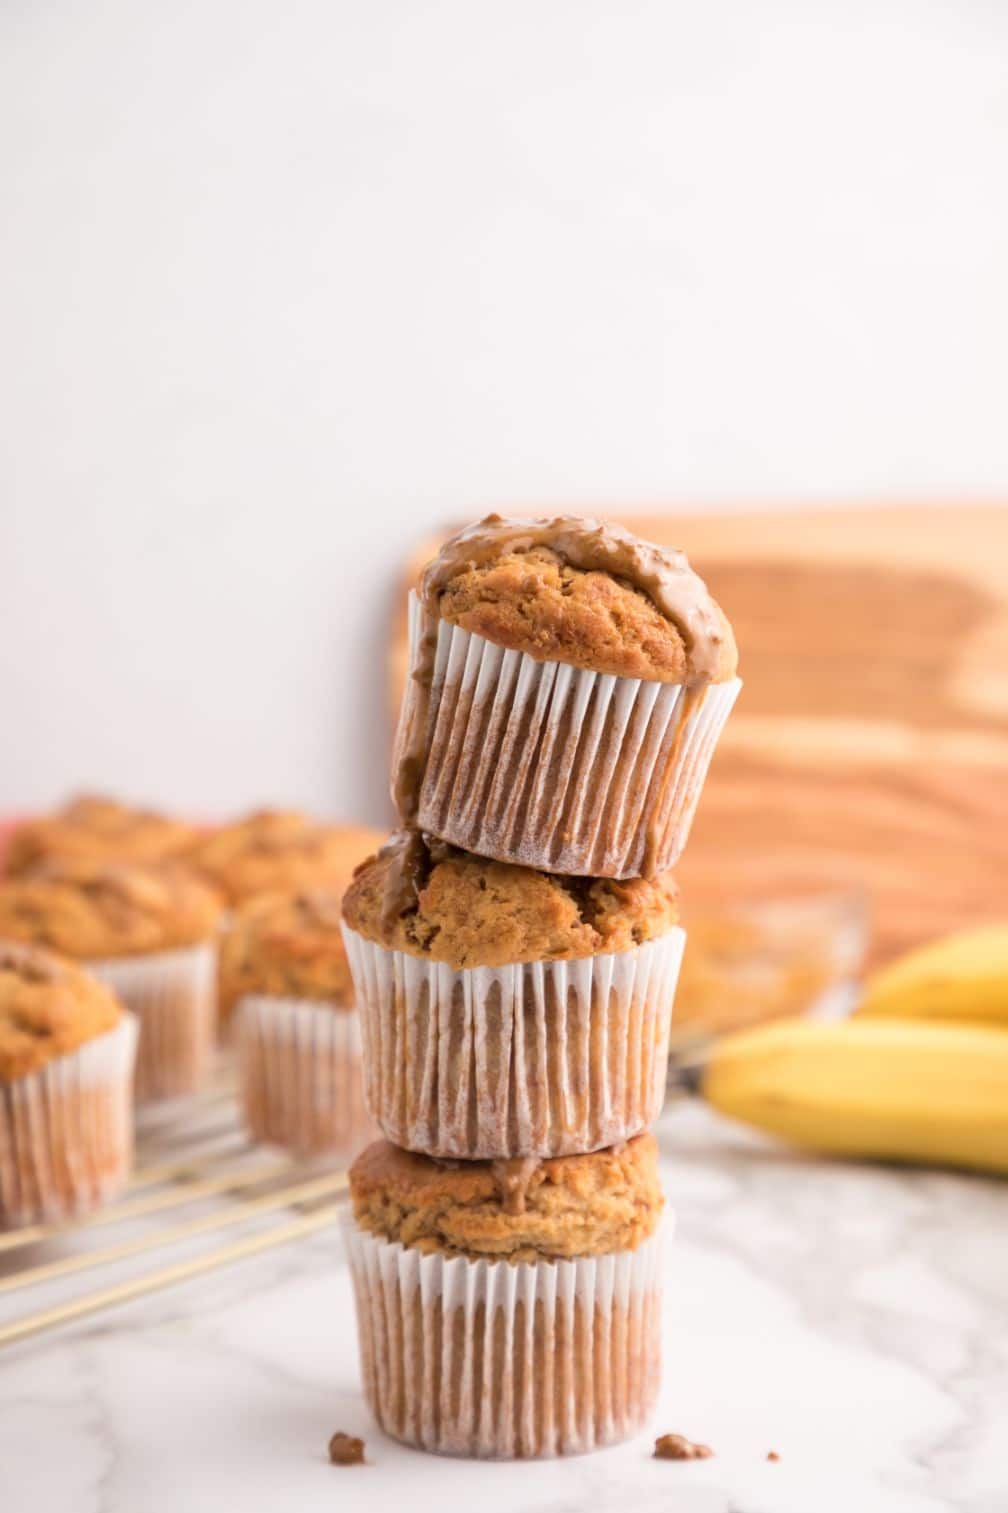 A stack of muffins with some bananas in the background